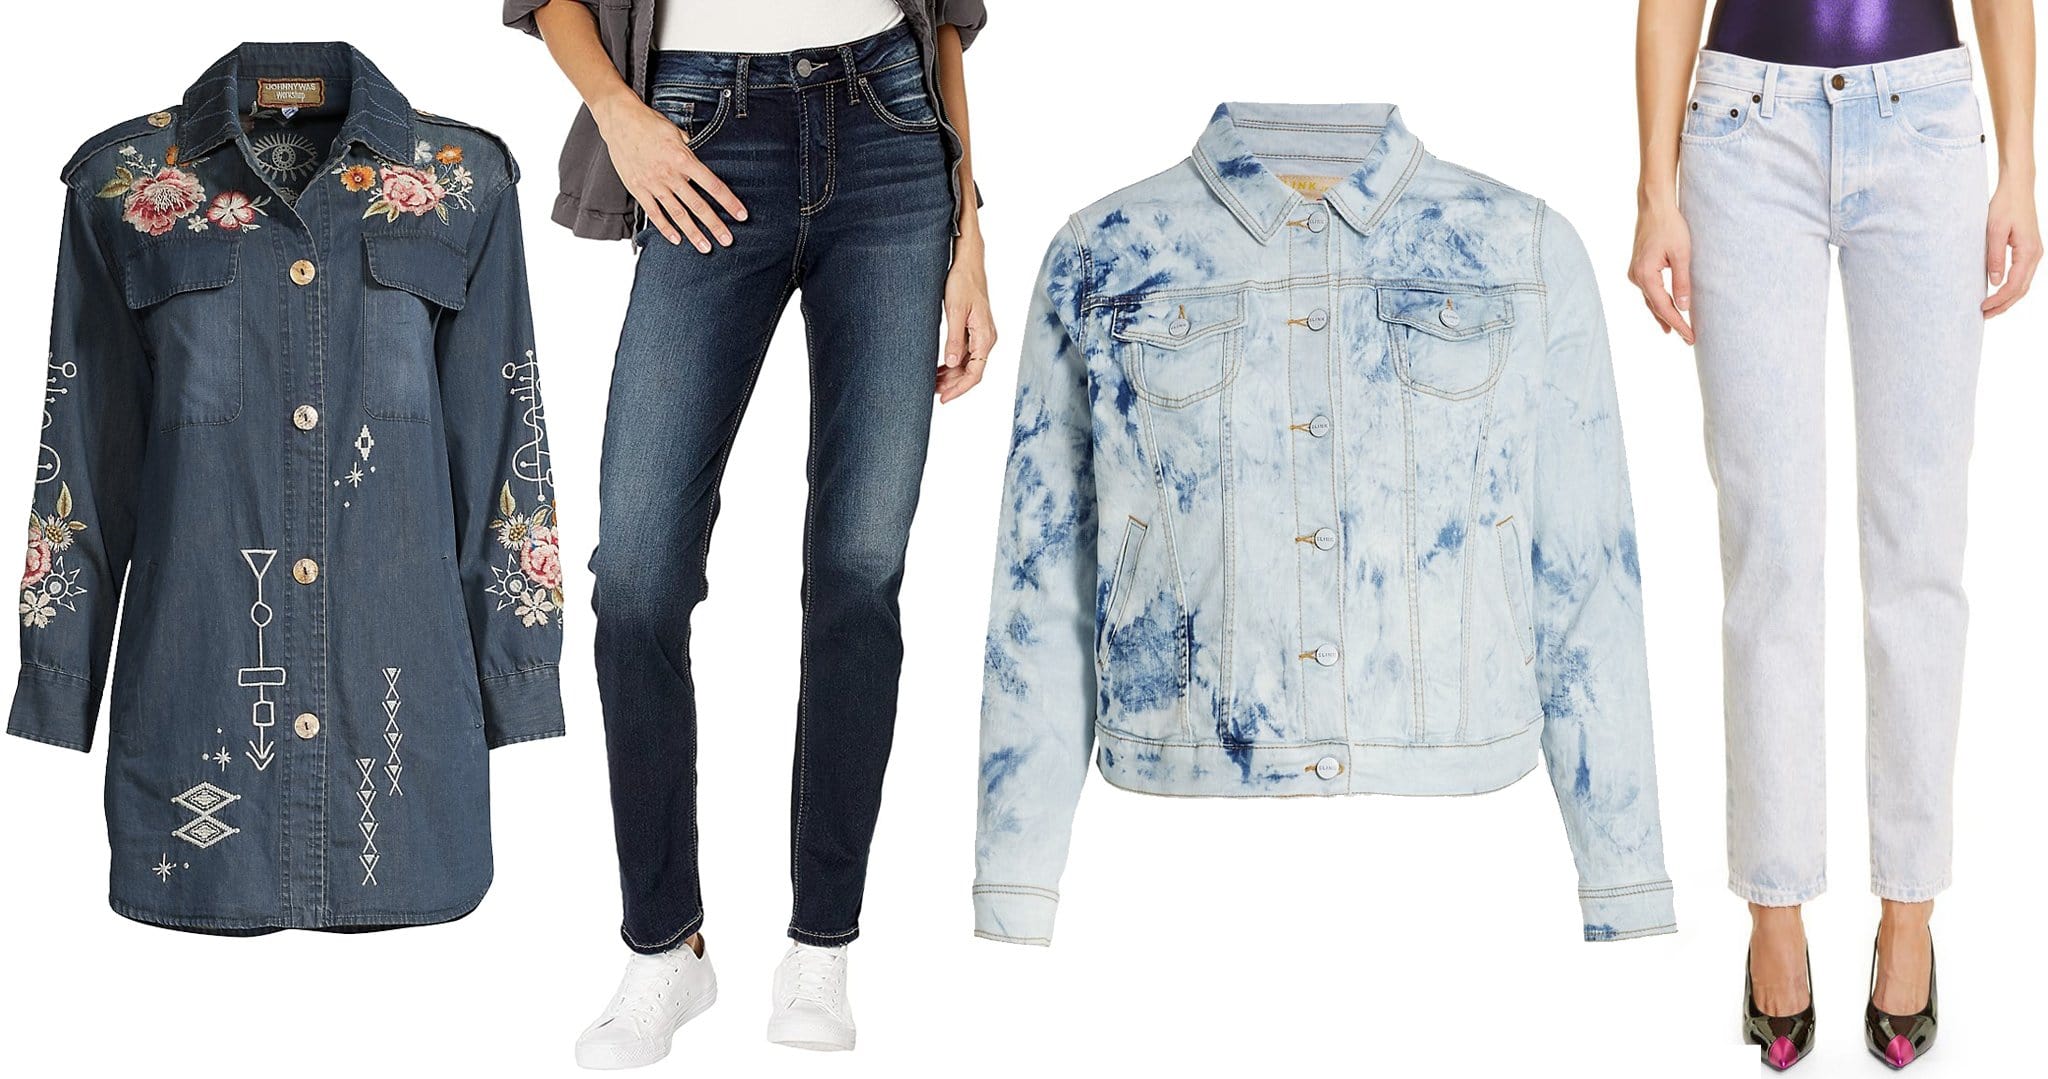 Detailed Denim Delight: From Johnny Was's Umoya Oversized Denim Jacket to Saint Laurent's Colombus Low Rise Nonstretch Denim Jeans, this collage showcases how detailed denim pieces like tie-dye and embroidery can add a unique flair to the denim-on-denim trend